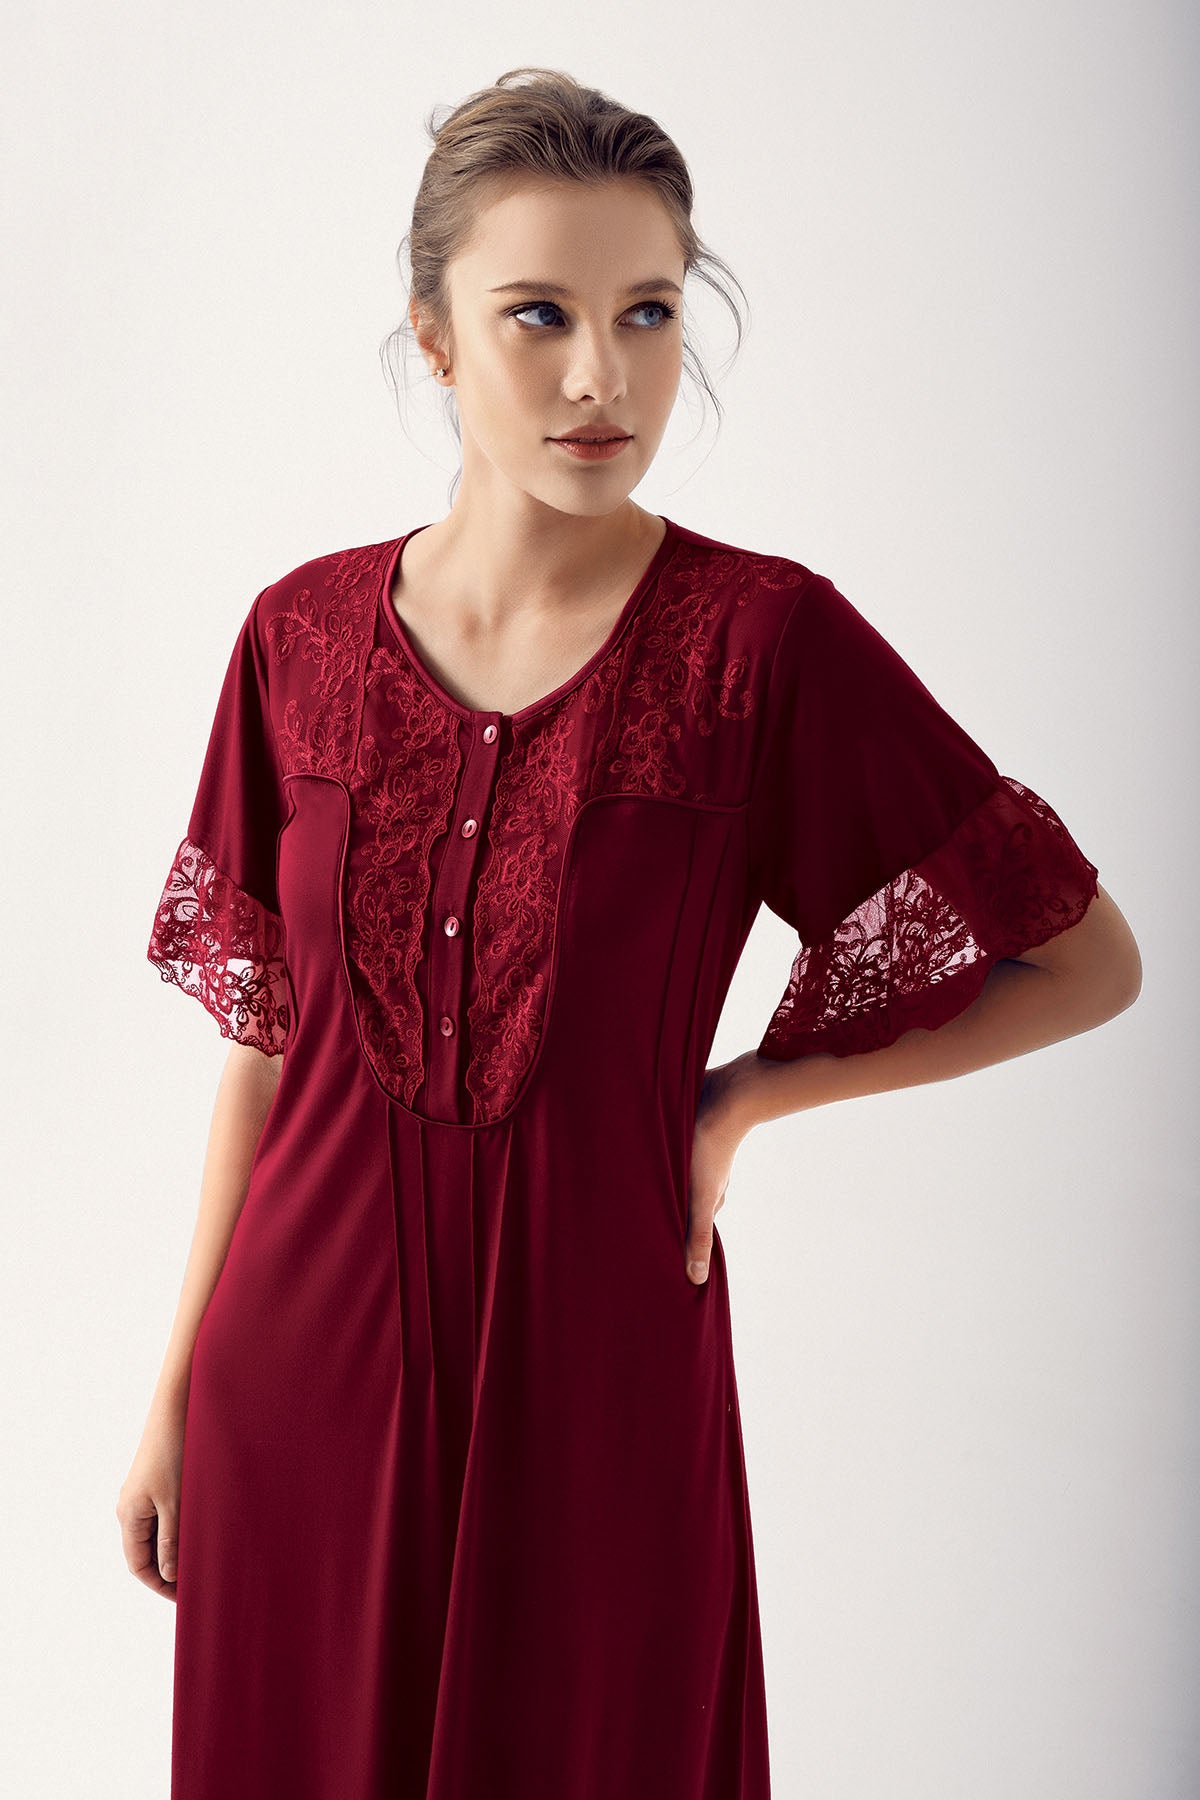 Shopymommy 14105 Collar And Sleeve Lace Maternity & Nursing Nightgown Claret Red